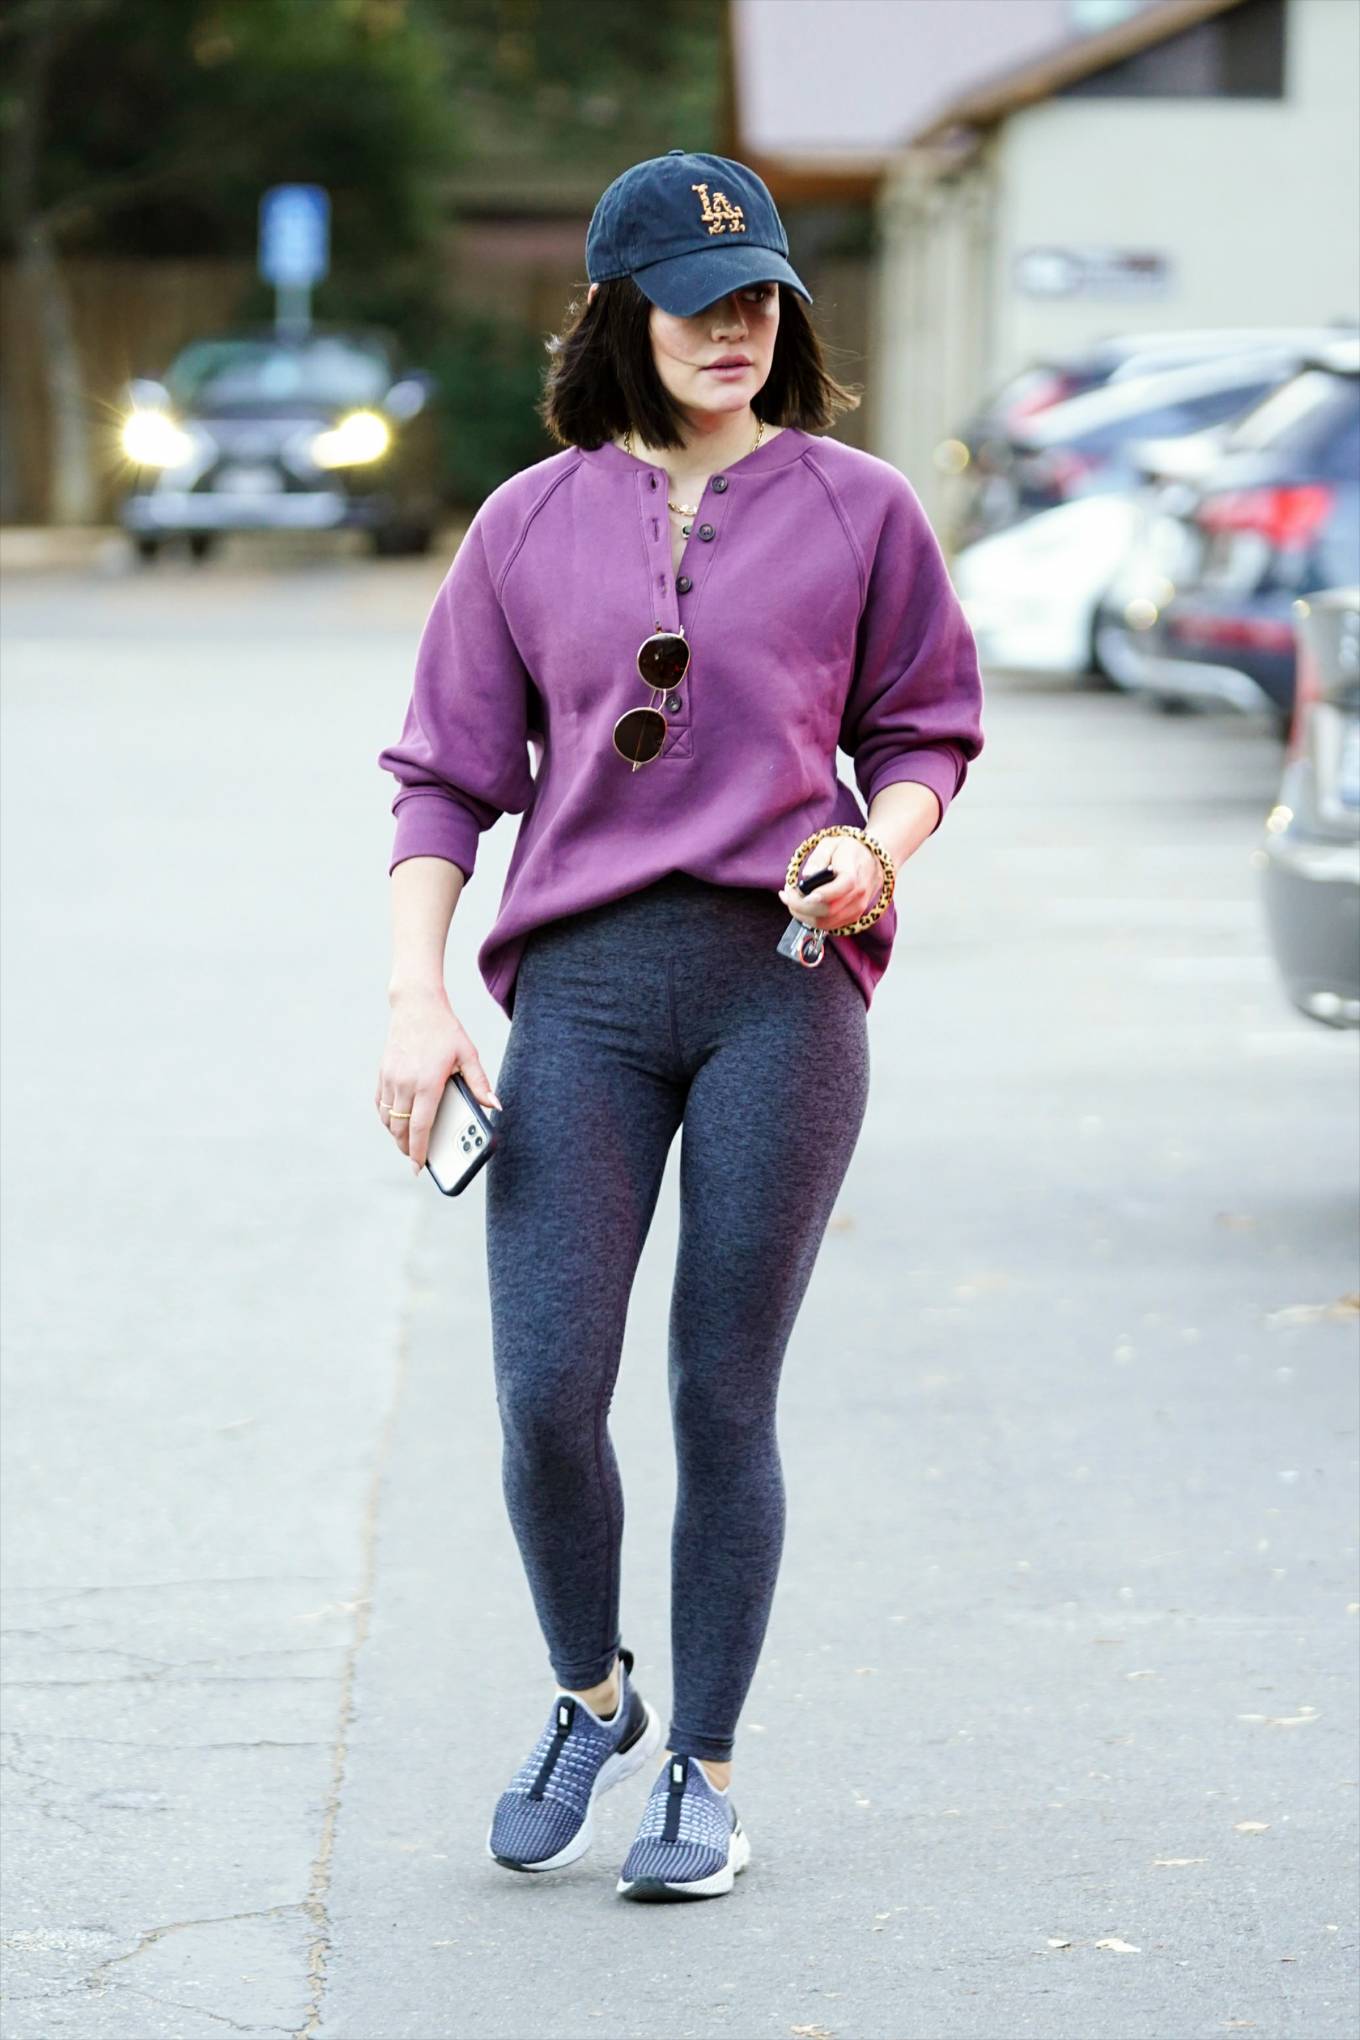 Lucy Hale 2022 : Lucy Hale – Wears a purple sweater and tights in Los Angeles-04